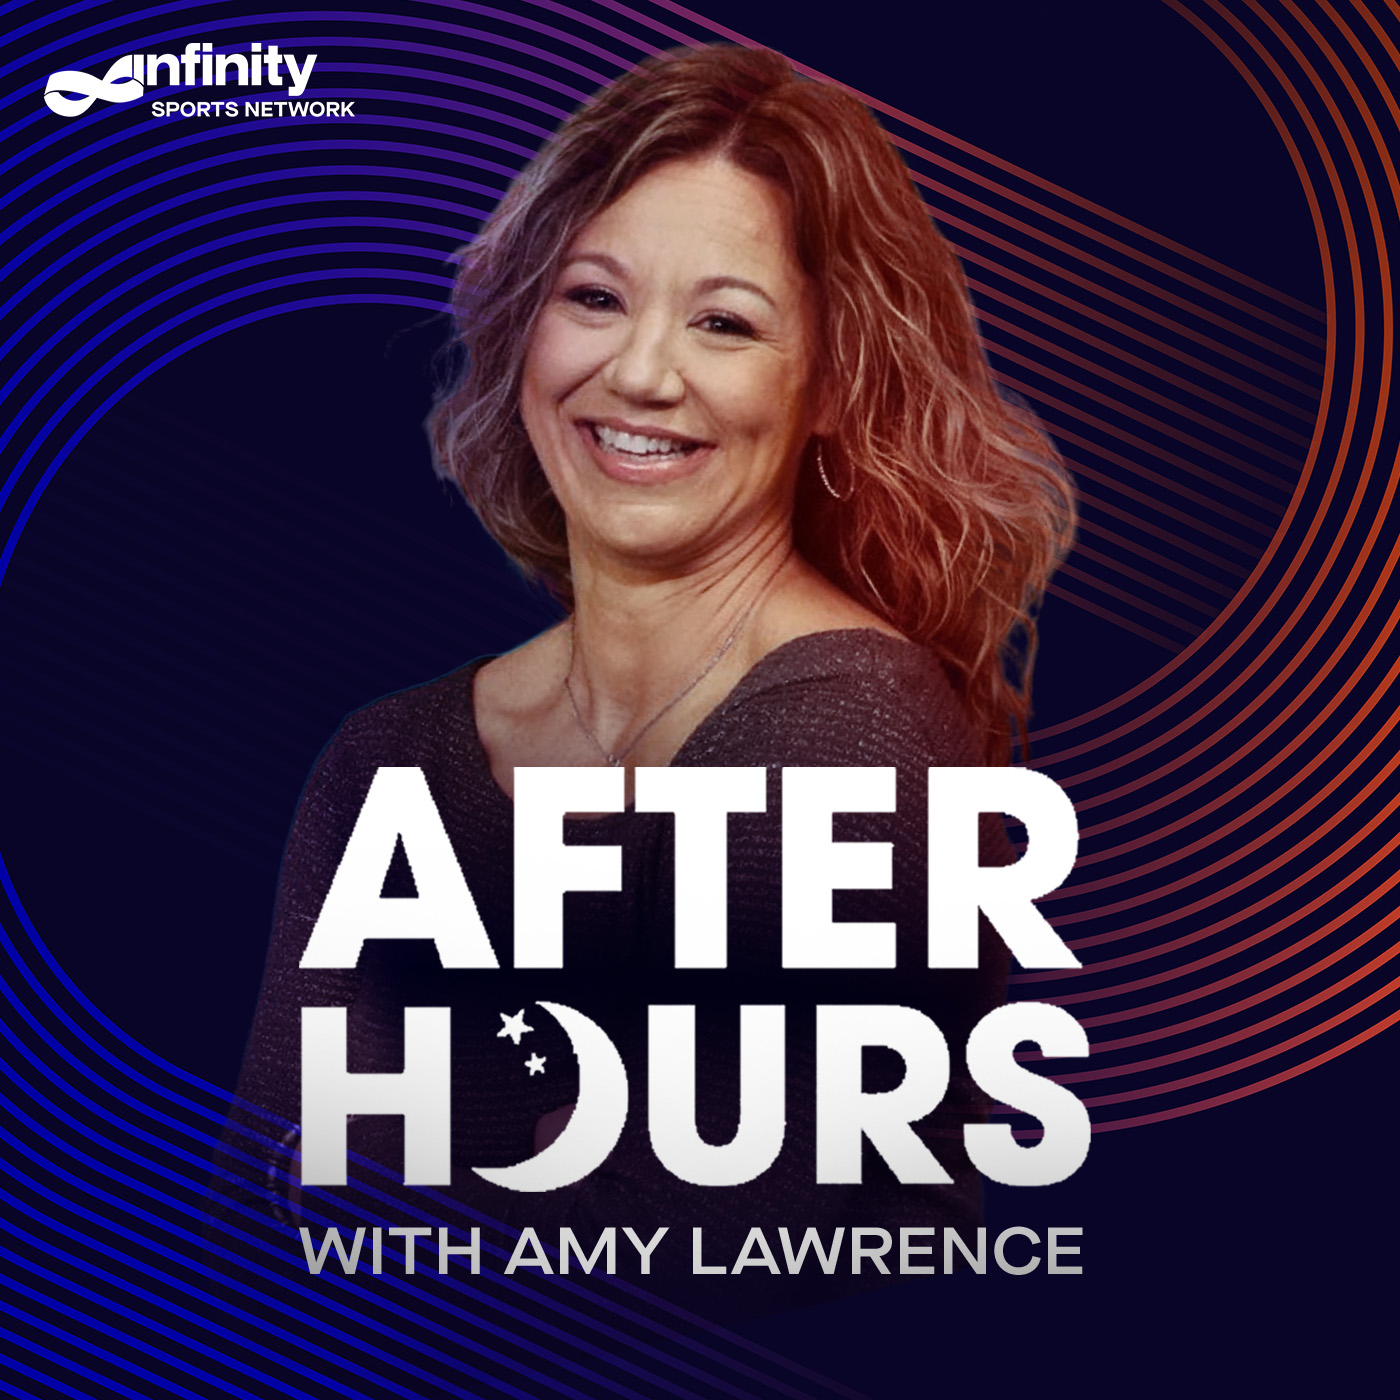 06/30/21 After Hours with Amy Lawrence PODCAST: Hour 3